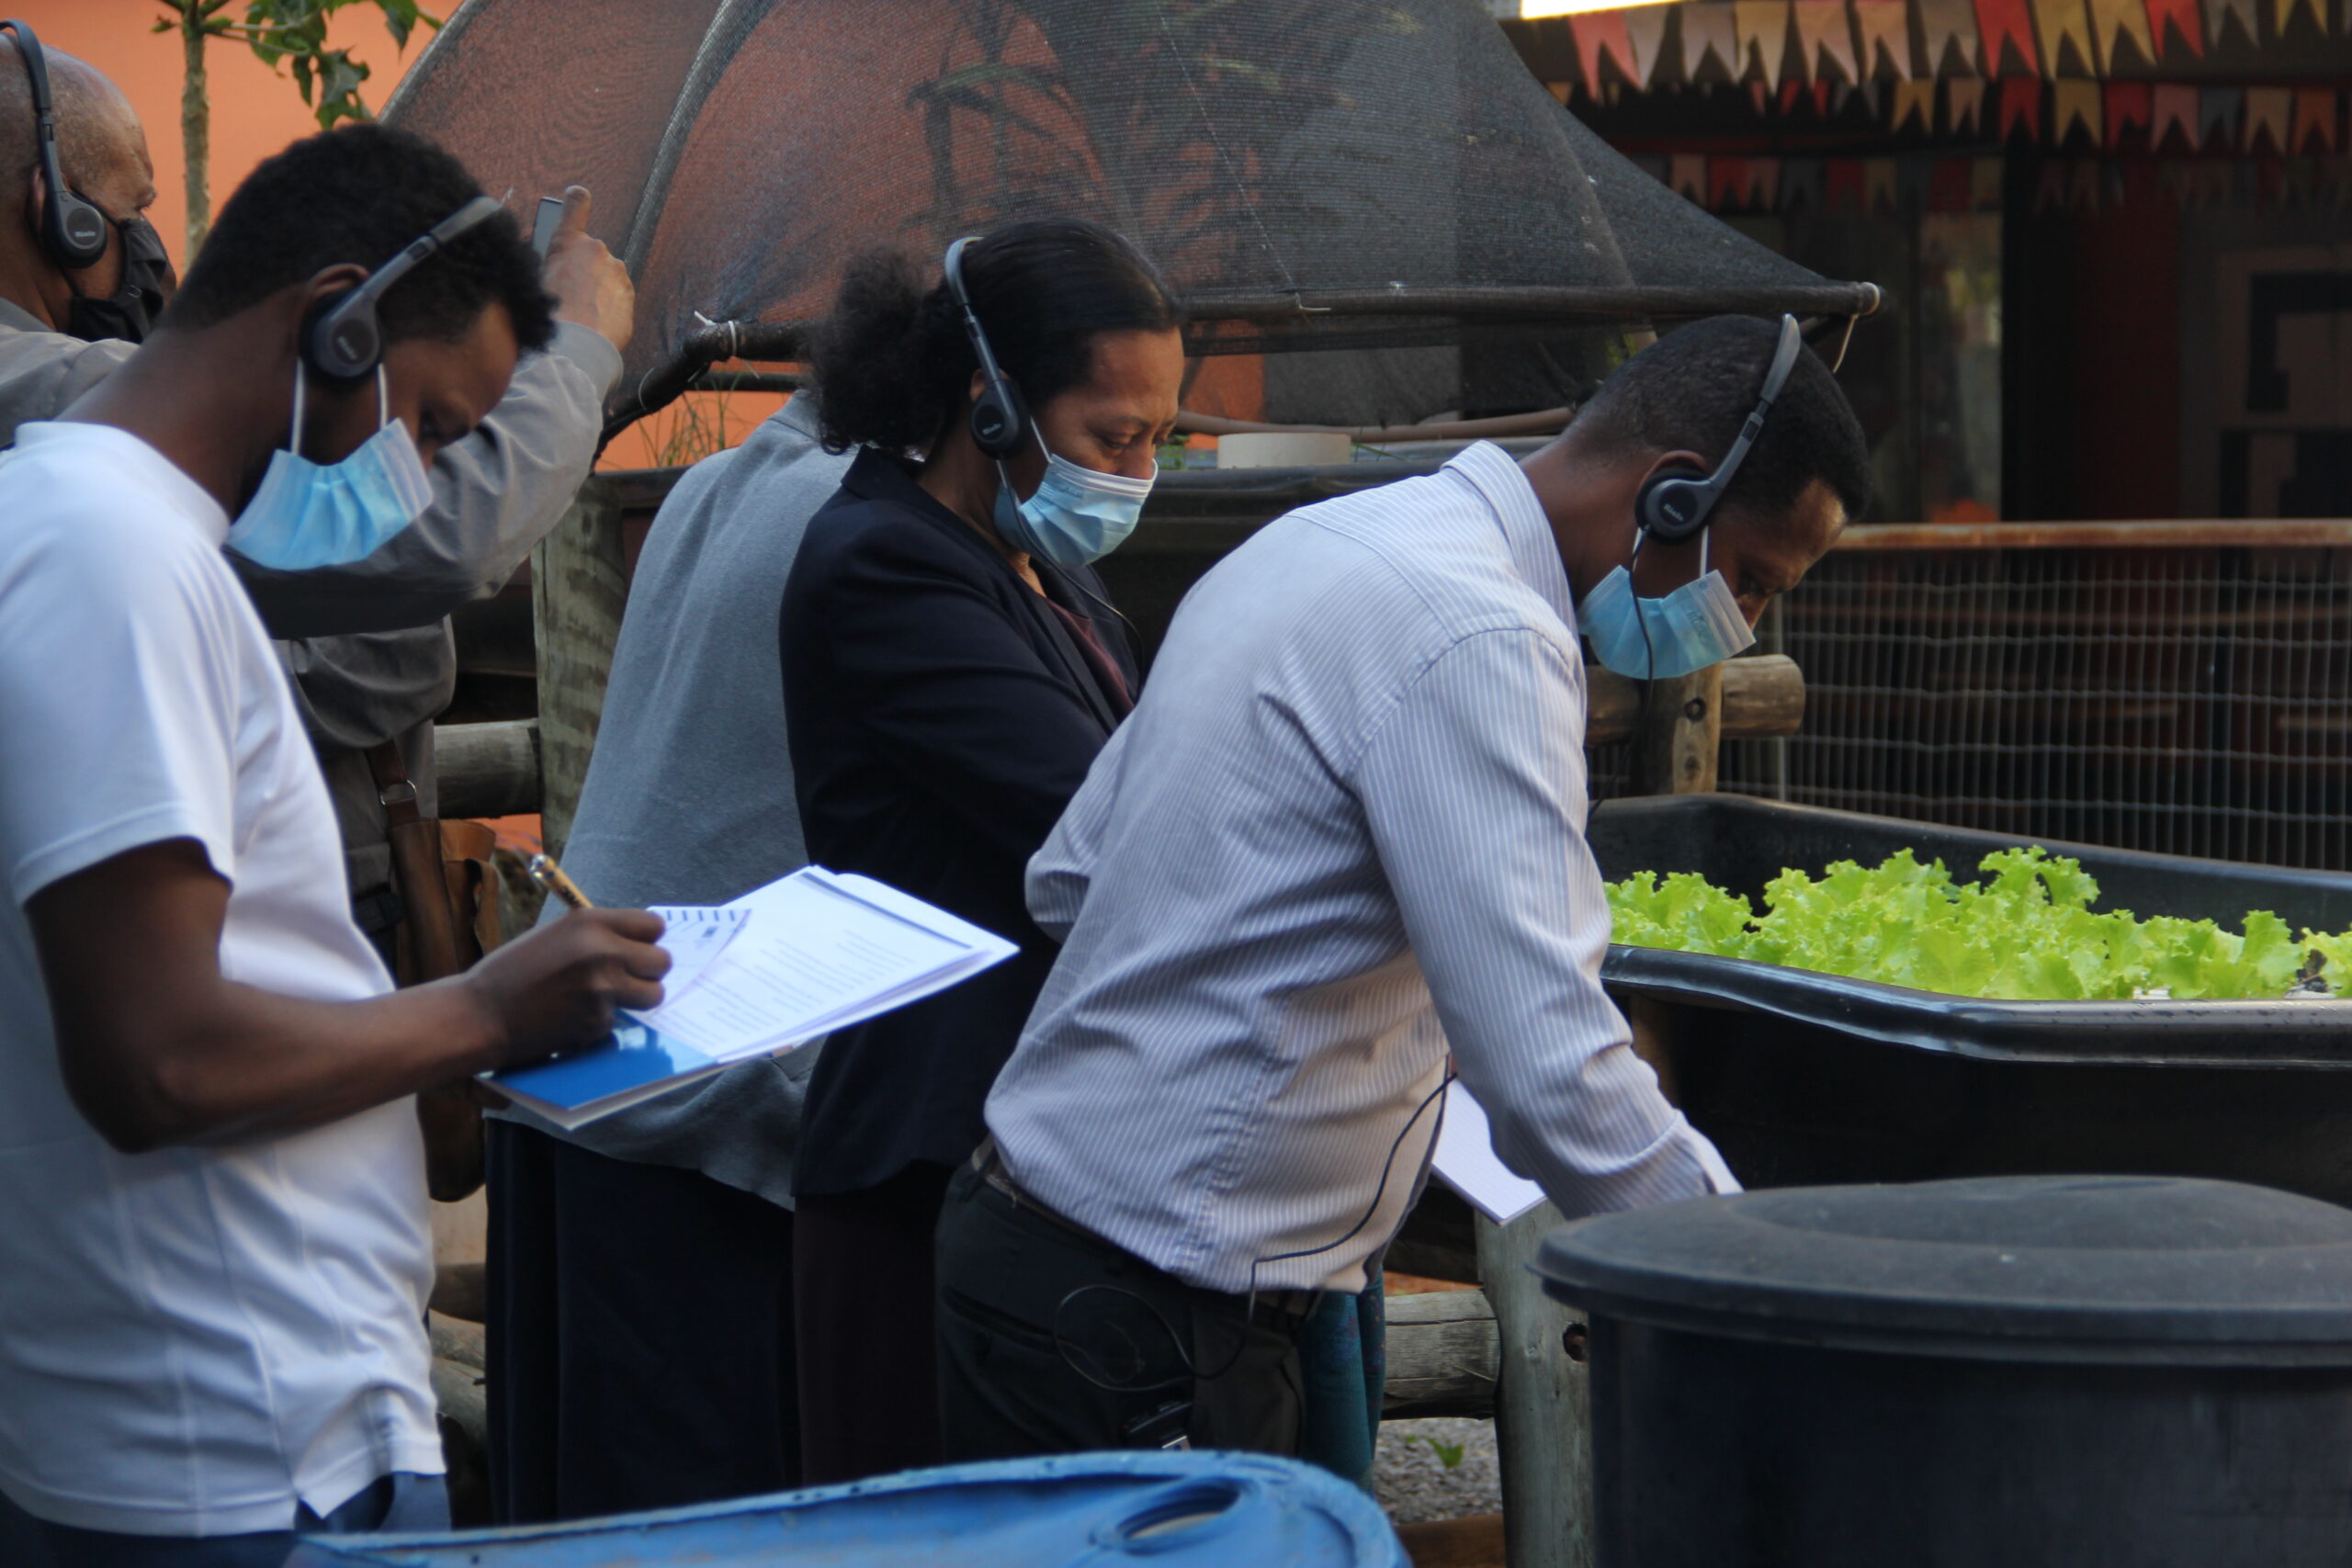 Photo showing members of the Ethiopian delegation wearing headsets and masks visiting a public brazilian school in the middle of a community garden.